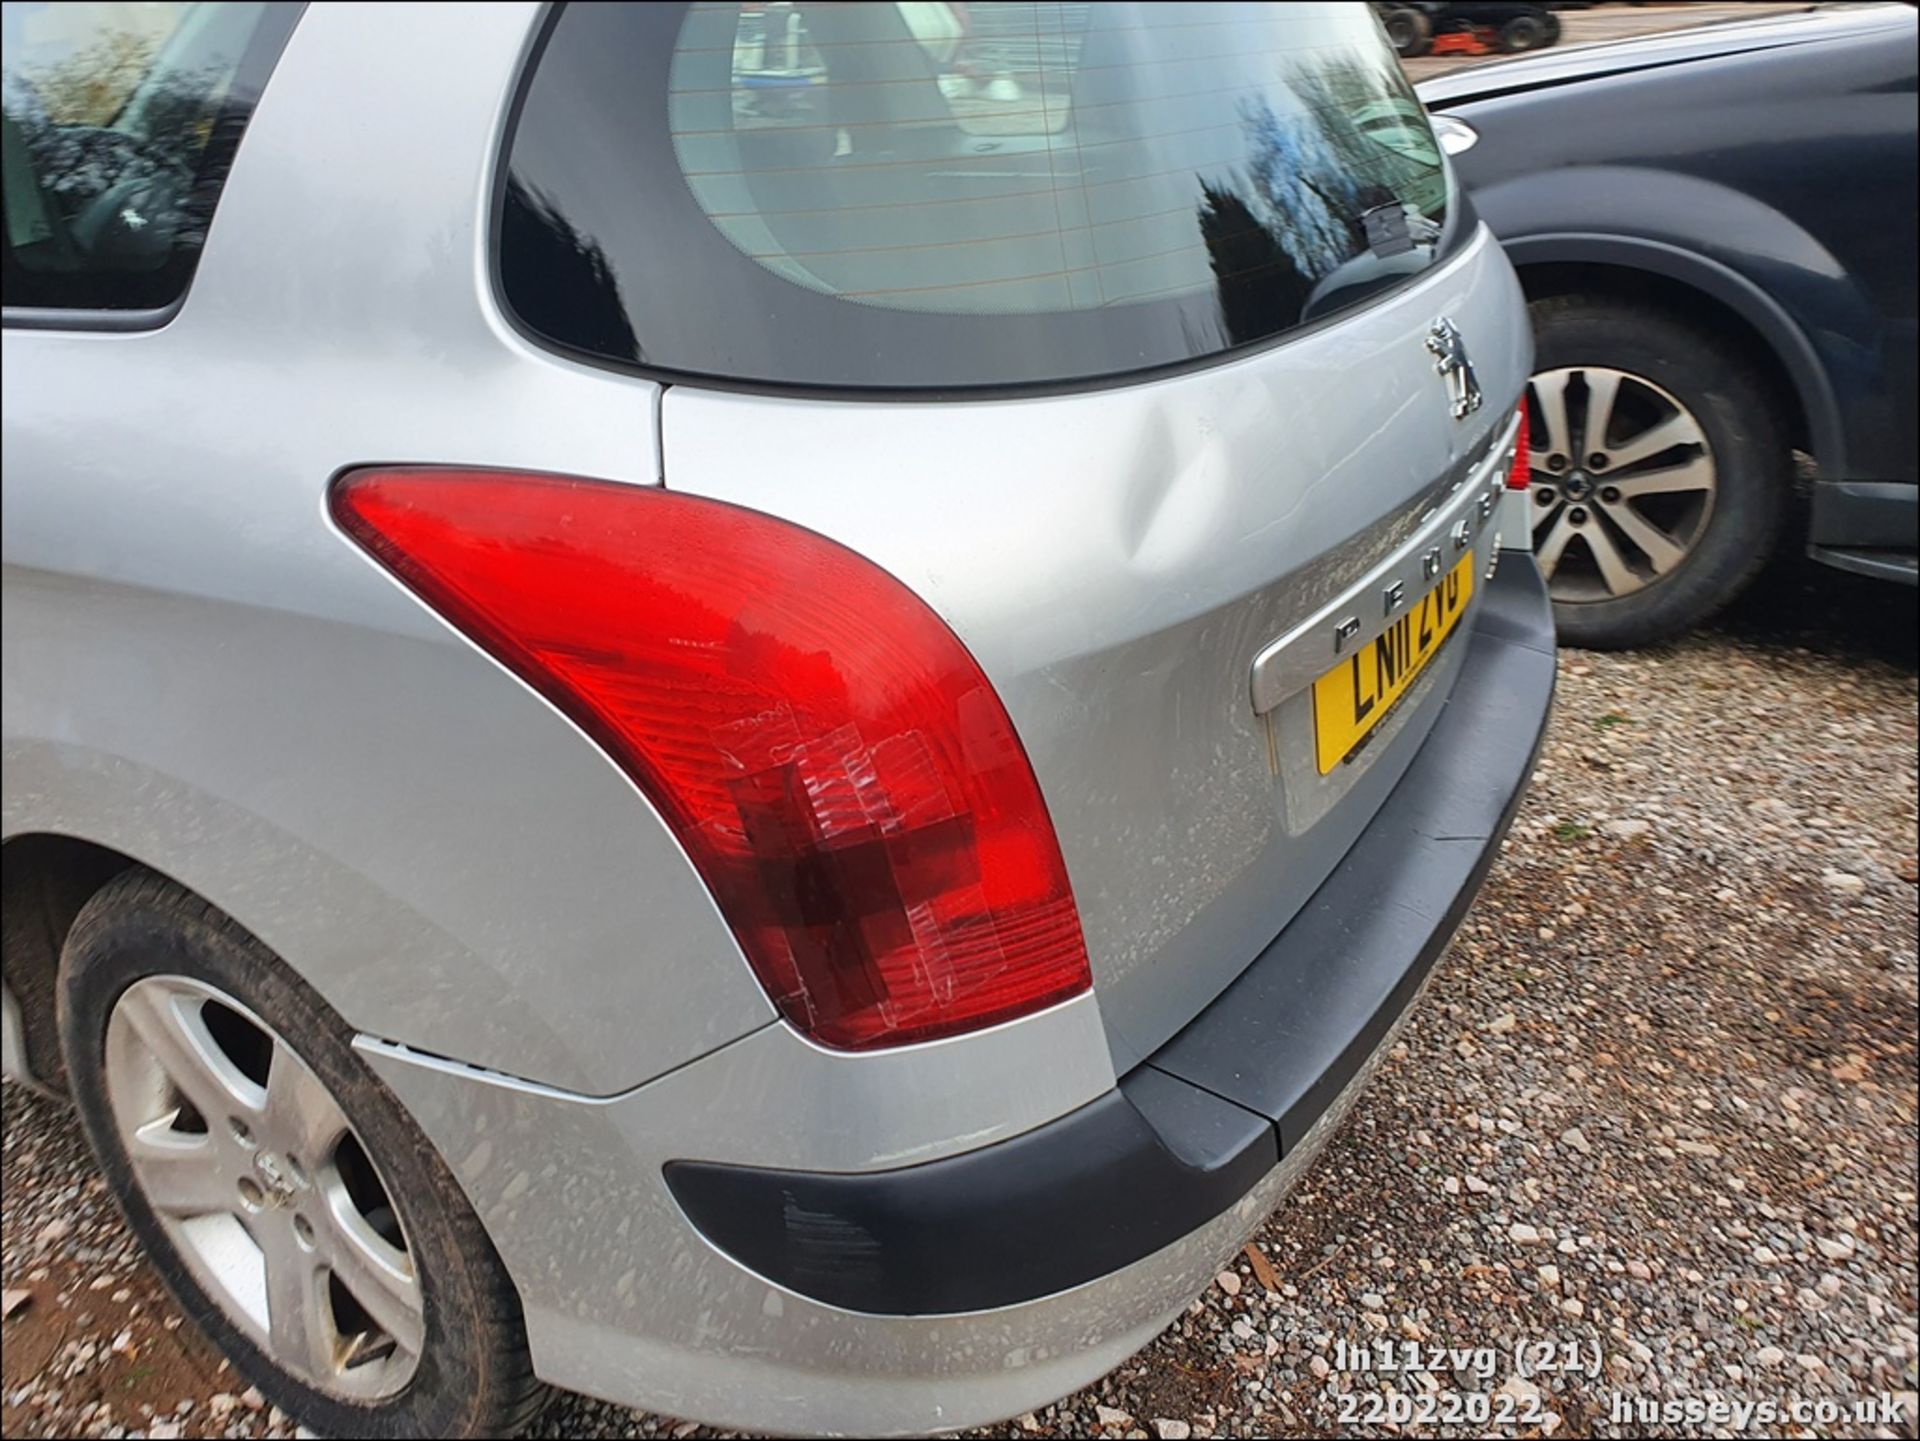 11/11 PEUGEOT 308 S SW HDI 92 - 1560cc 5dr Estate (Silver, 115k) - Image 21 of 46